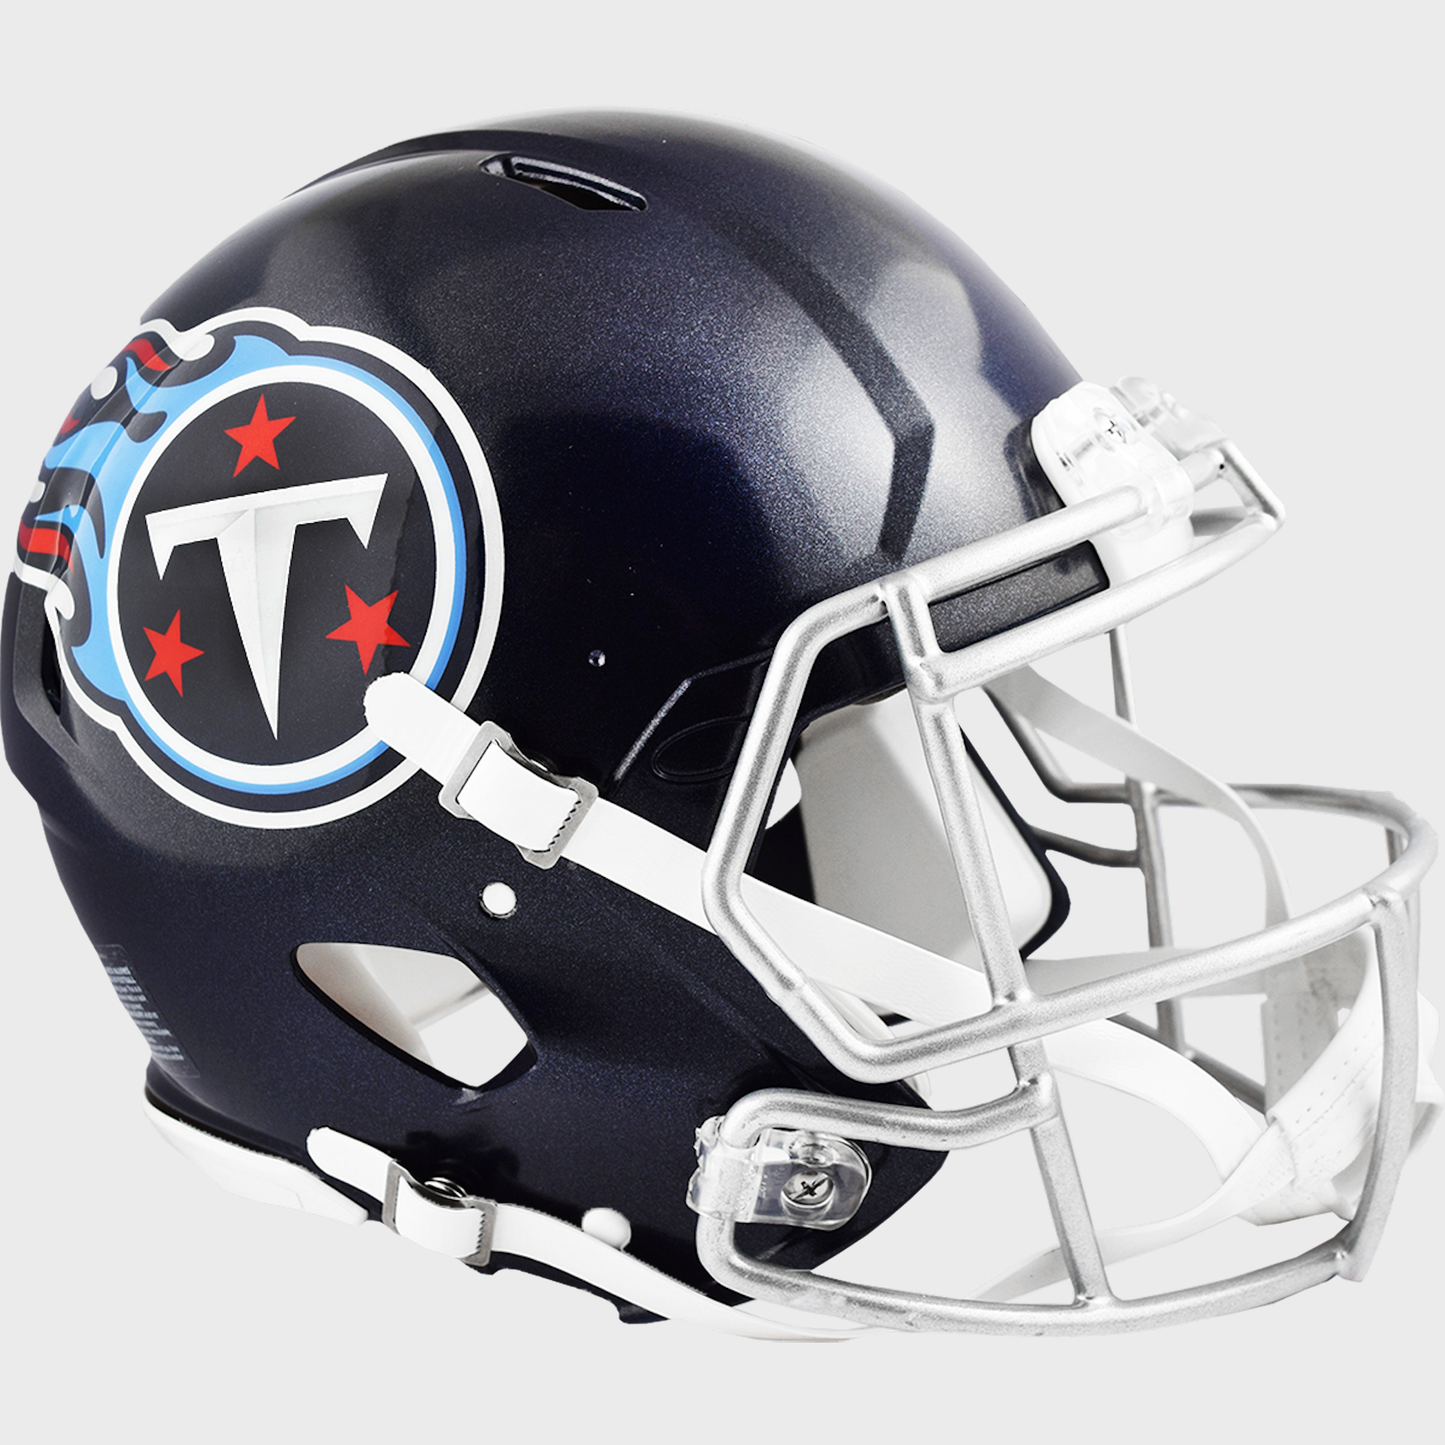 Tennessee Titans authentic full size helmet